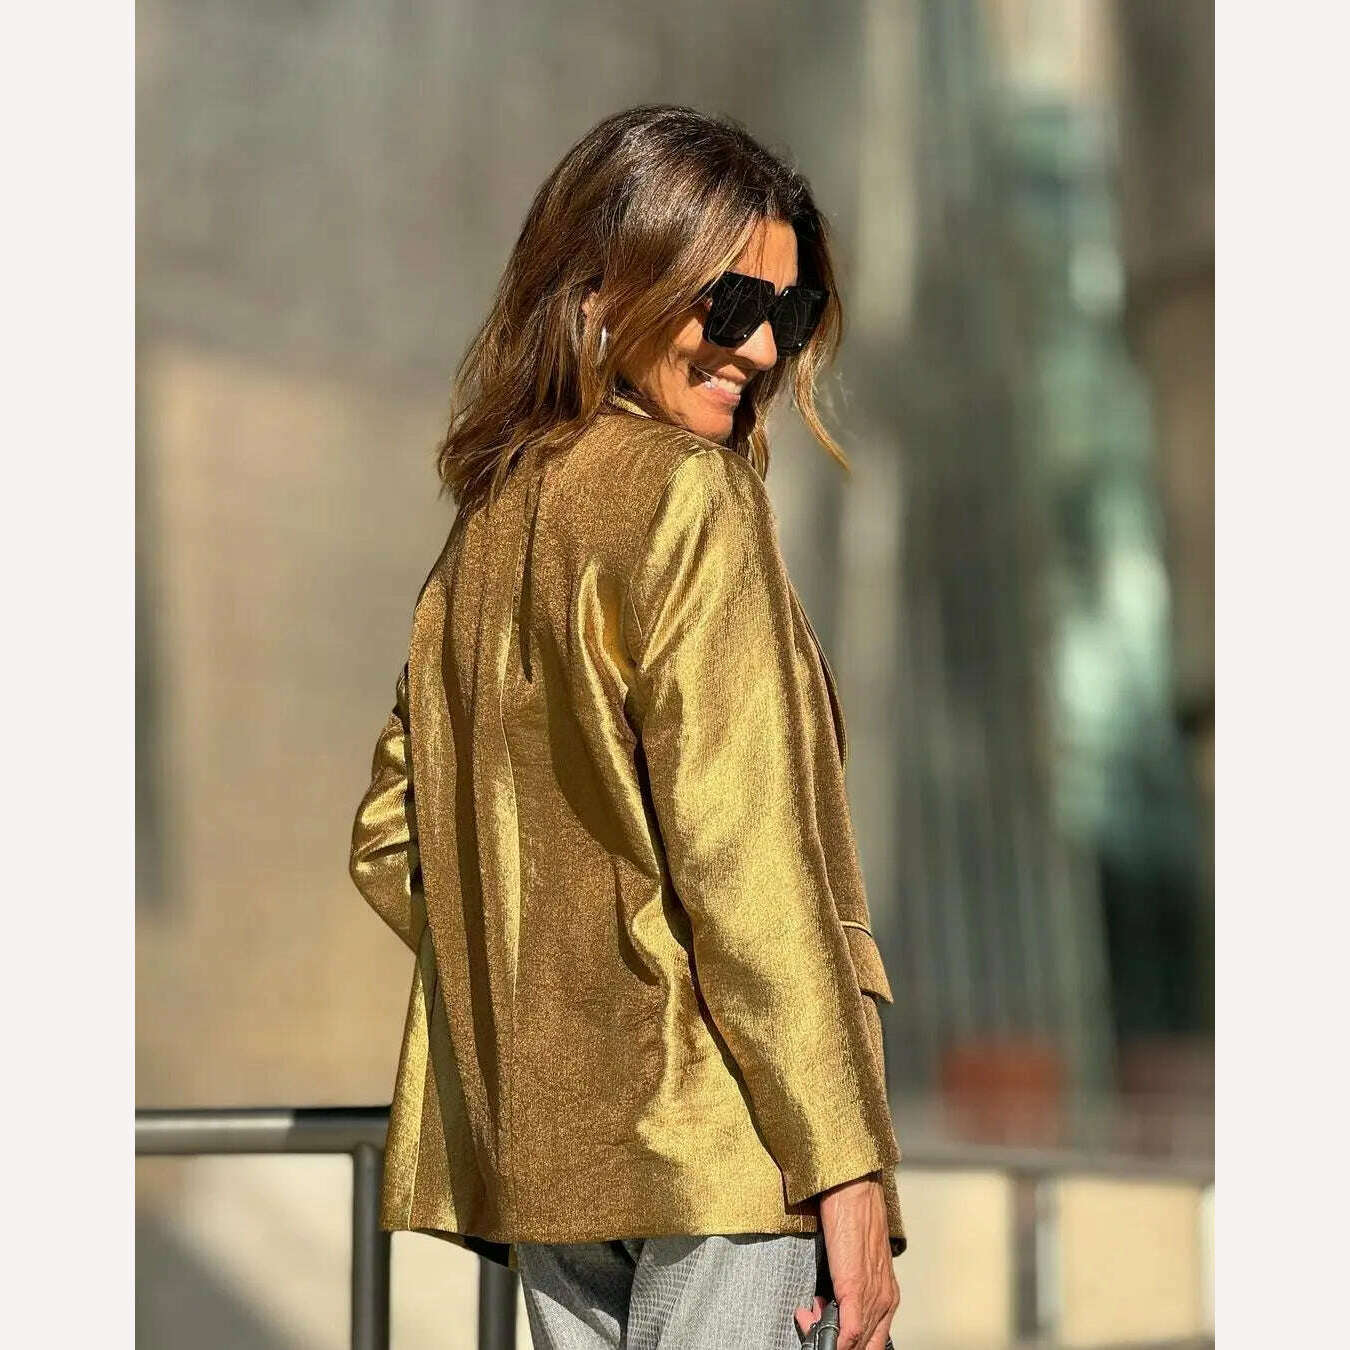 Autumn Gold Color Blazer Jacket For Women Fashion Loose V Neck Long Sleeve Coat 2023 Elegant Lady Chic Party Streetwear New, KIMLUD Women's Clothes